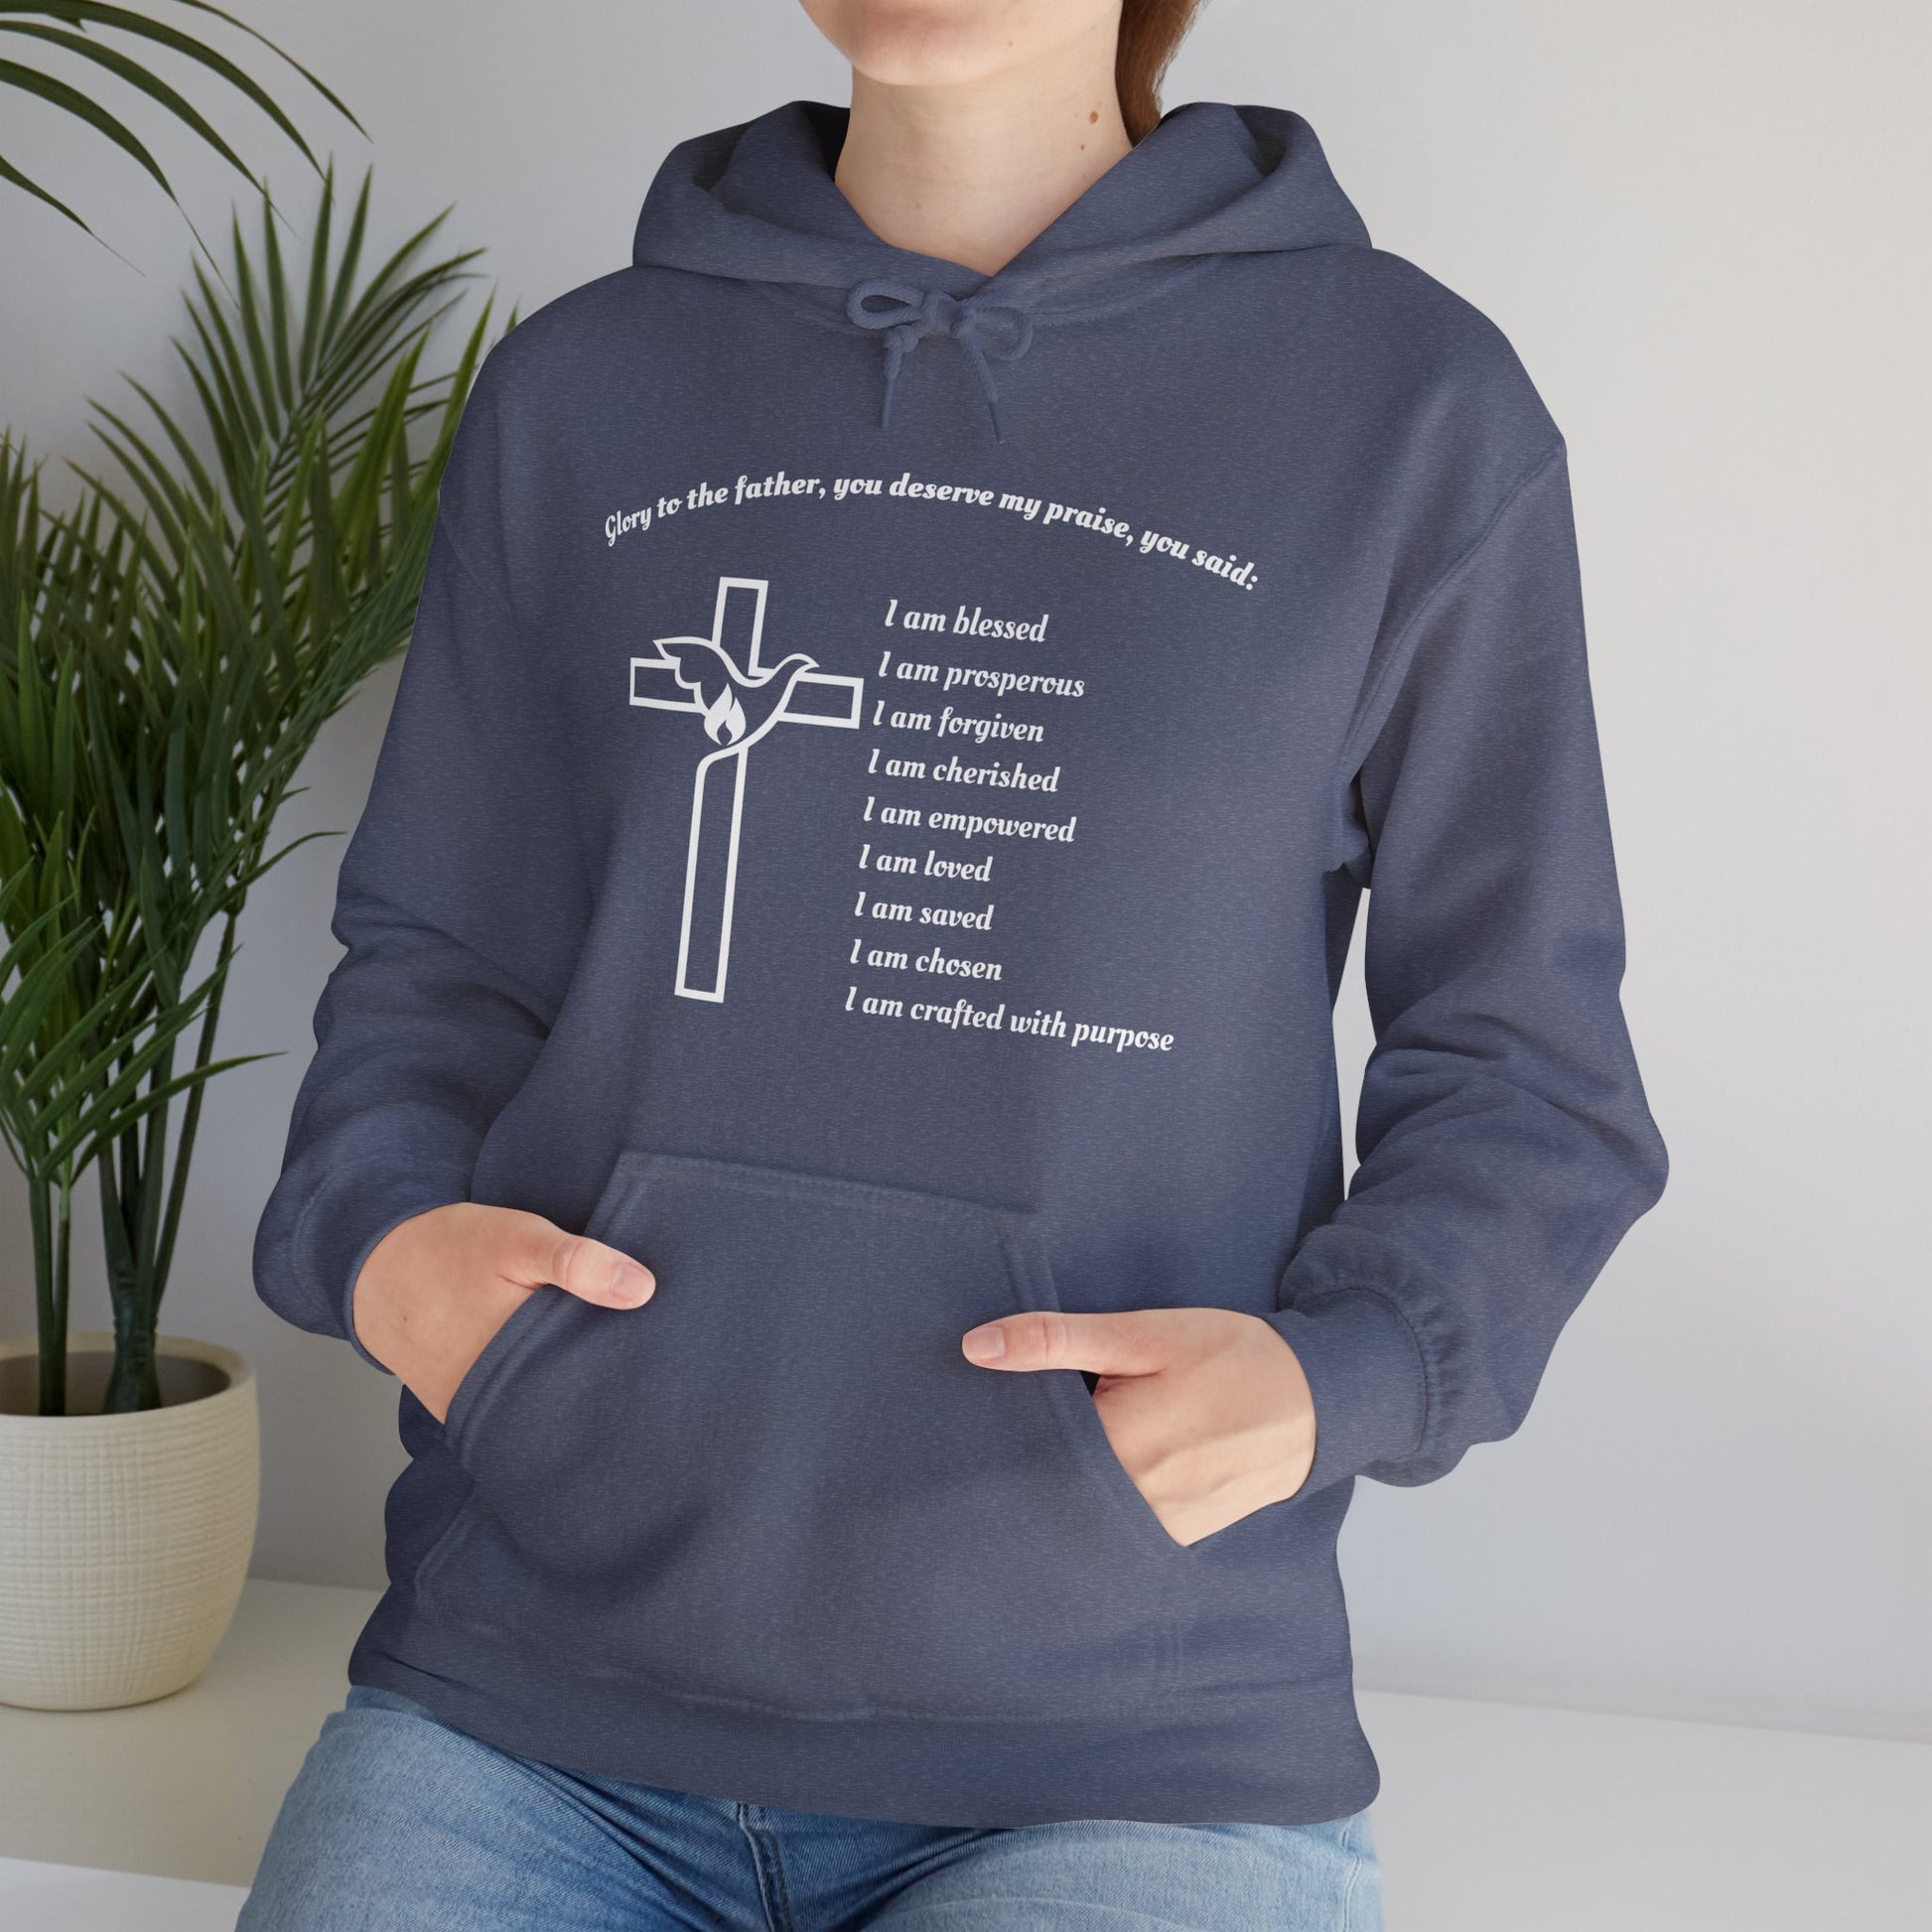 I am Glory to the Father Hooded Sweatshirt Unisex Cozy Heavy Blend33